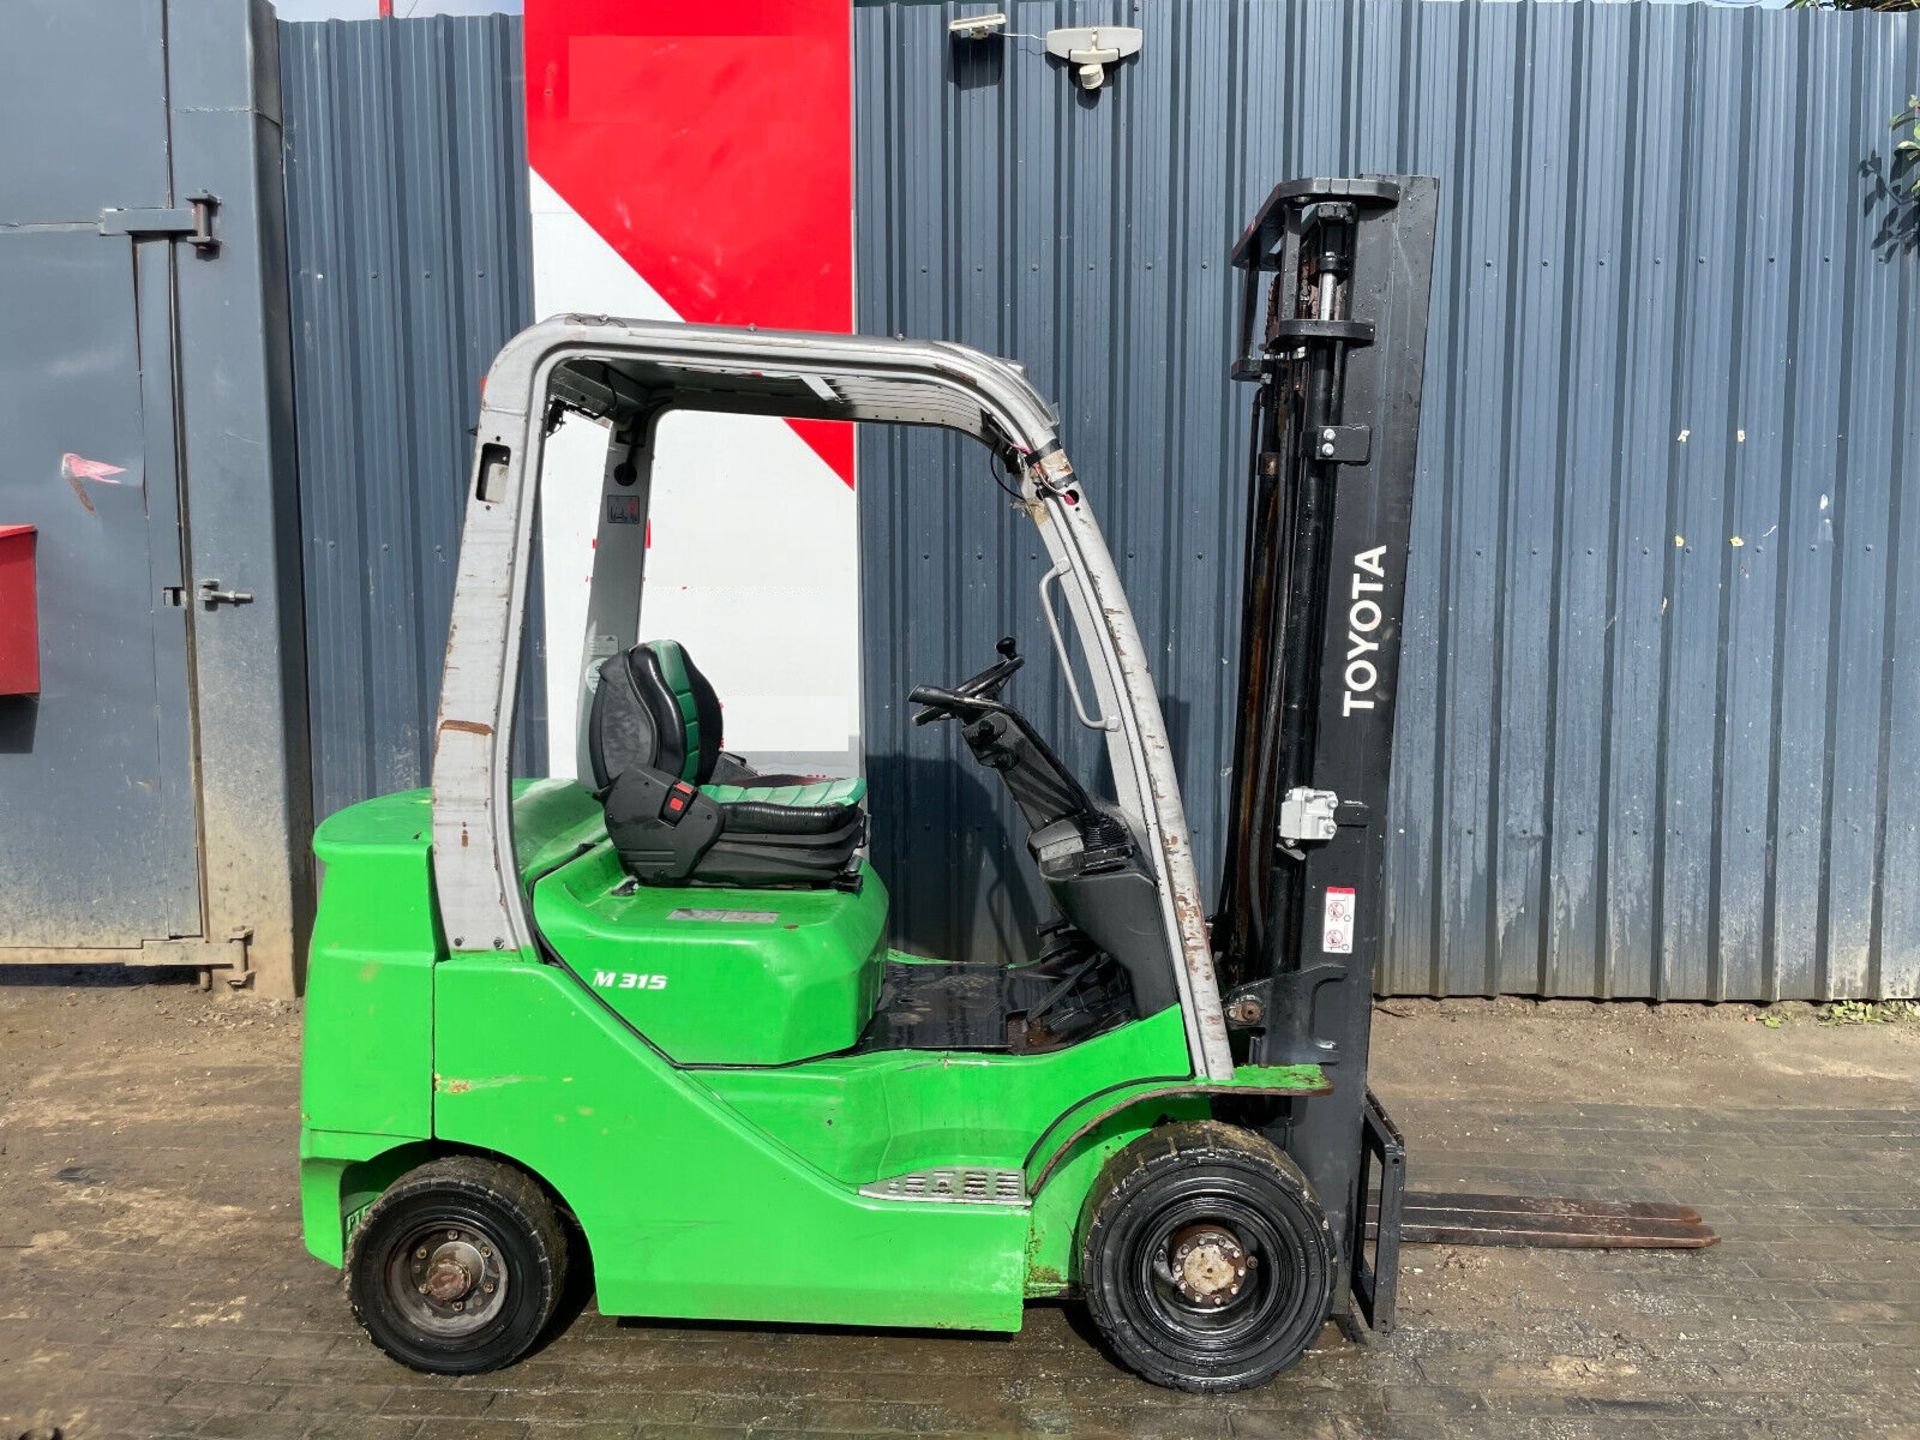 TOYOTA TOUGH: 2017 DIESEL FORKLIFT BEAST - Image 8 of 8